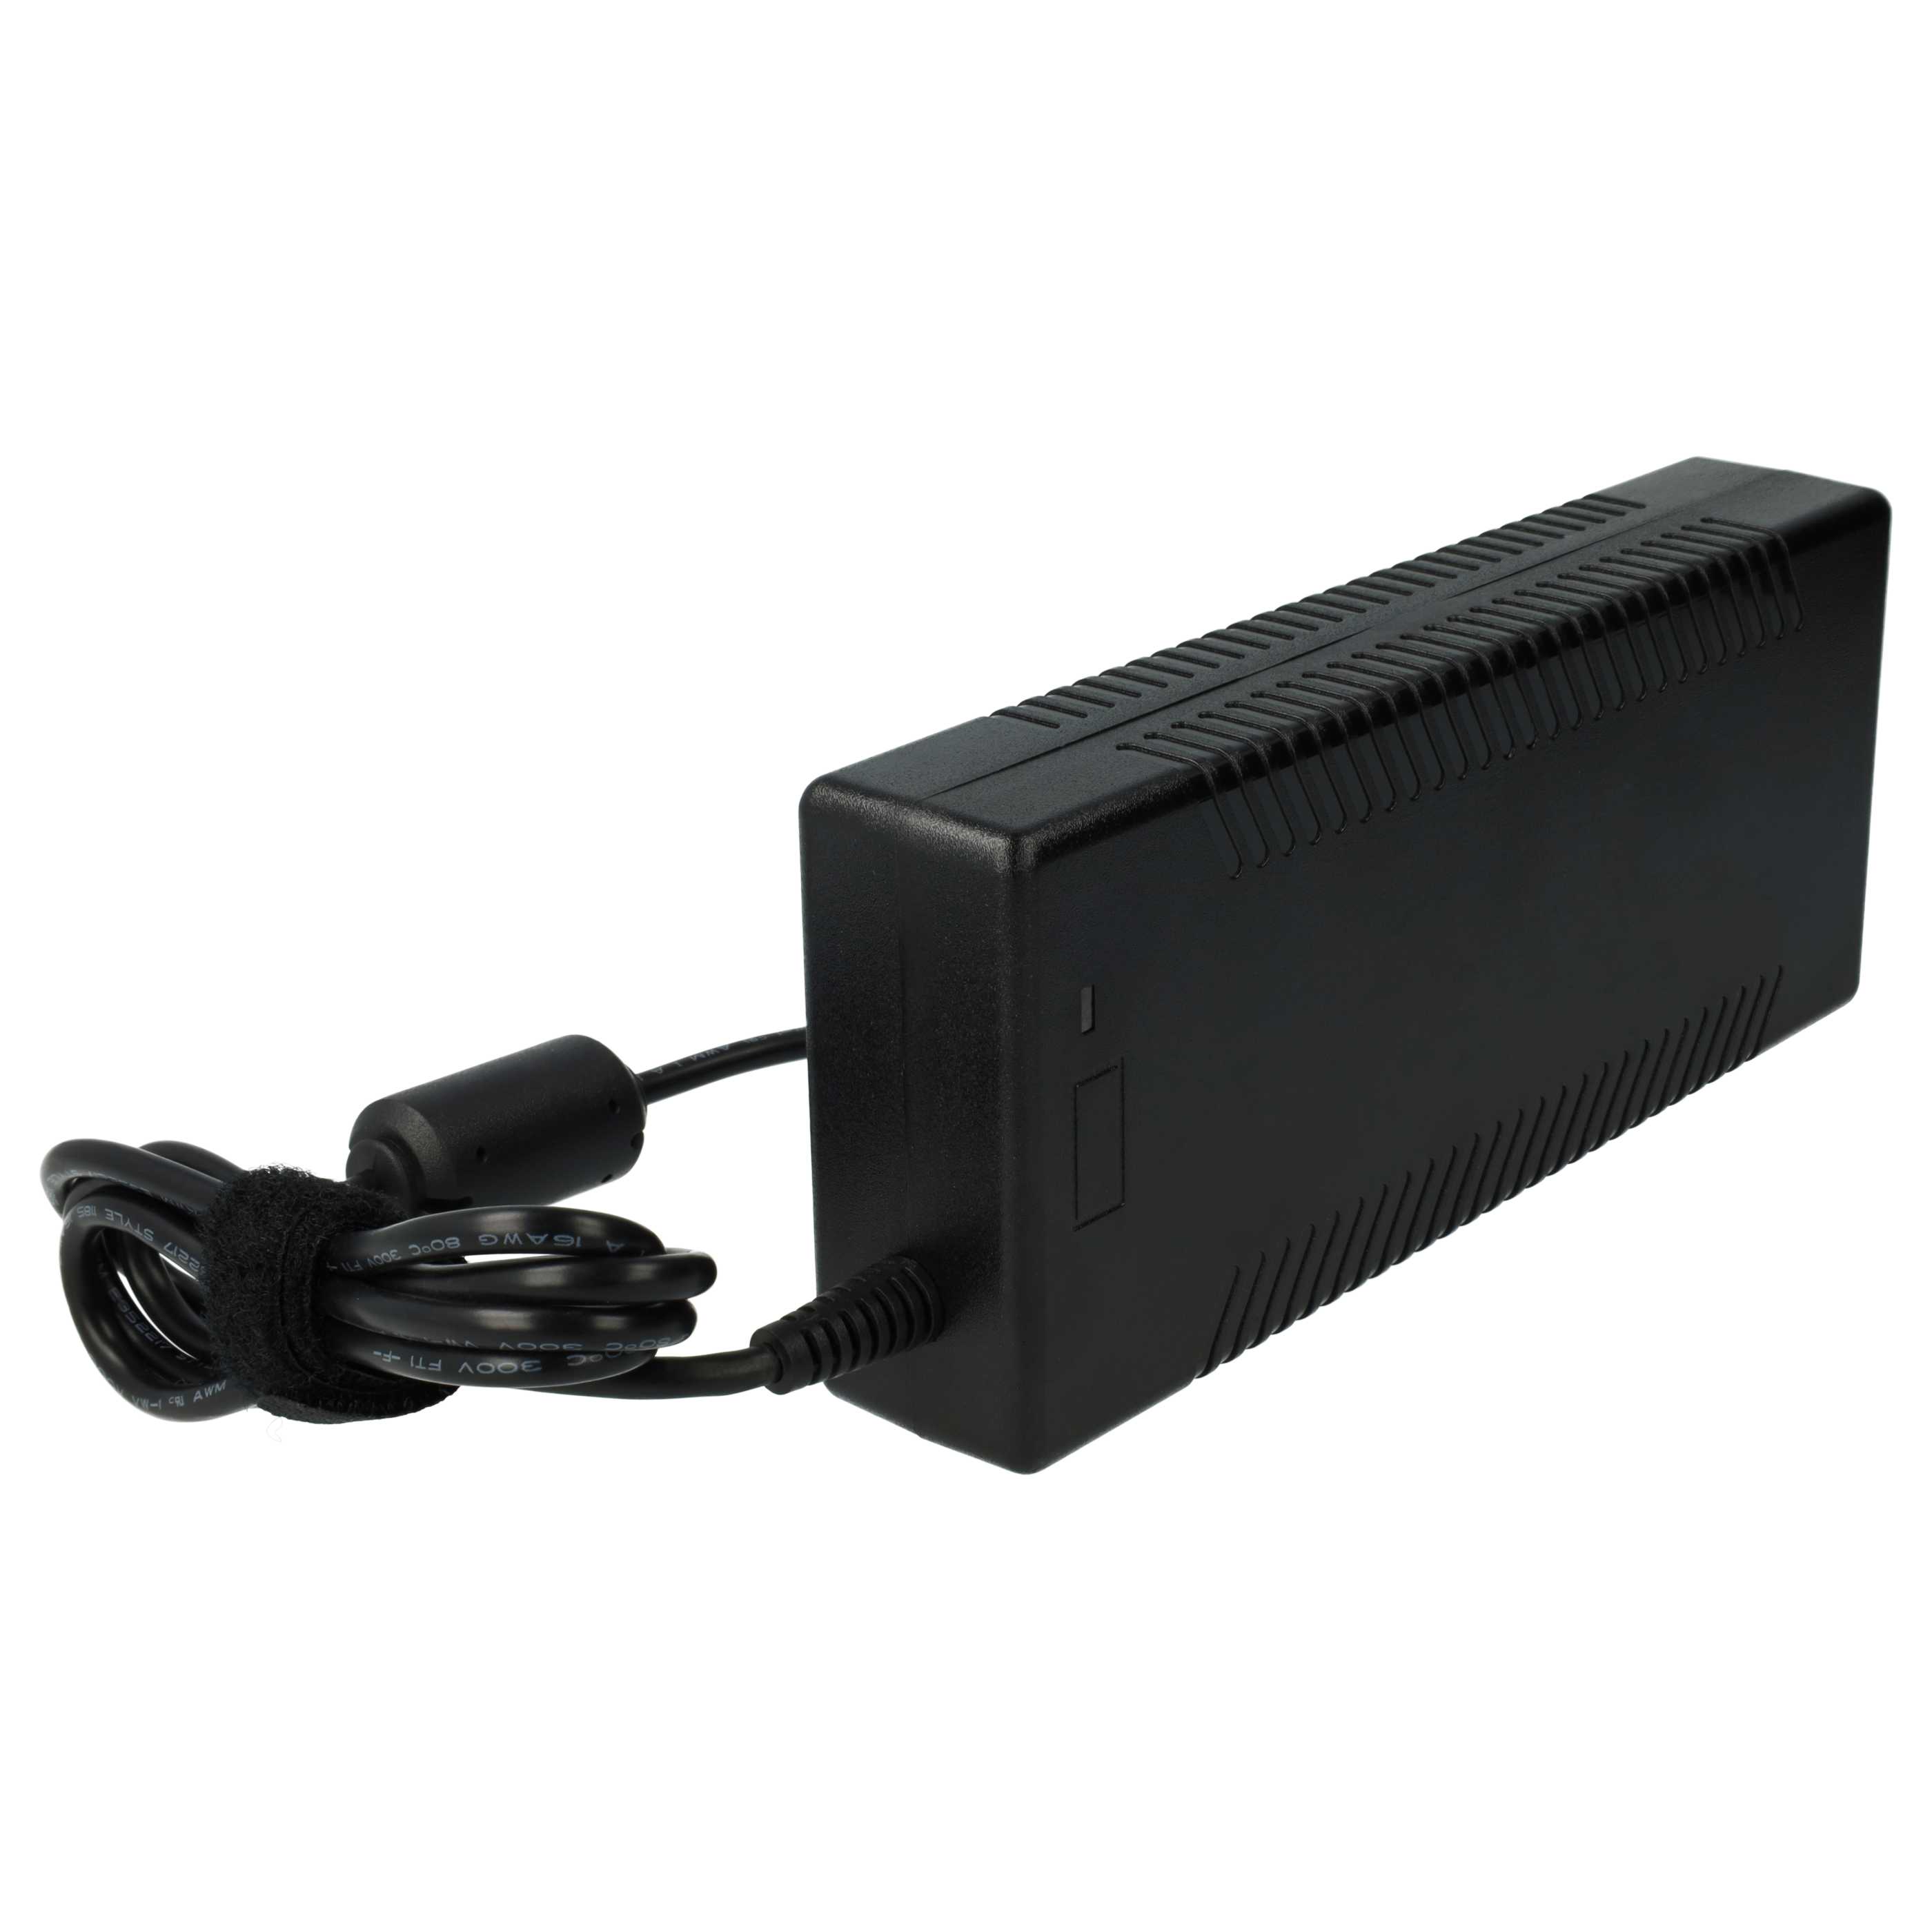 Mains Power Adapter replaces Sony PCGA-AC19V3 for SonyNotebook, 120 W